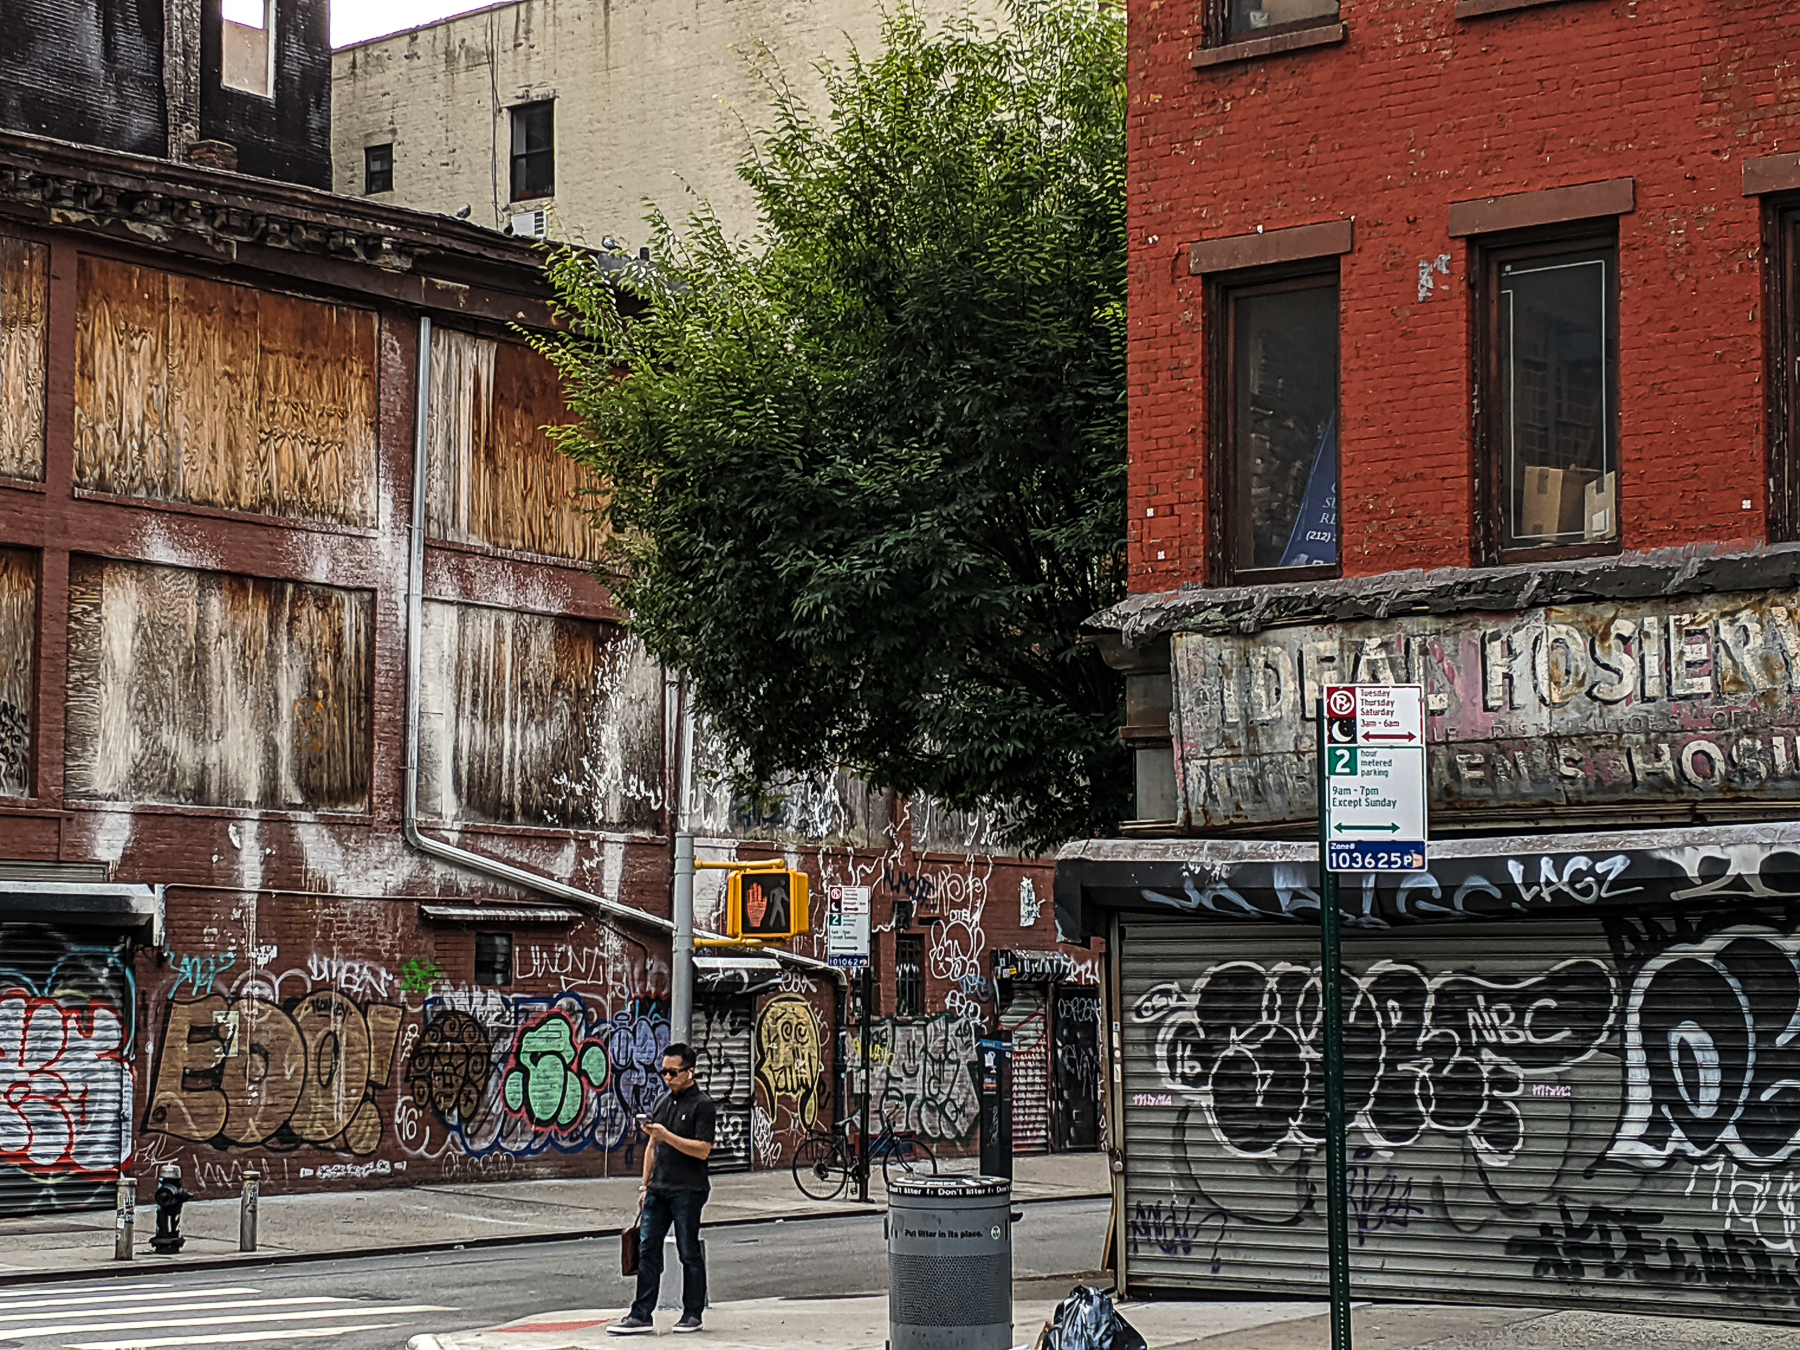 sad looking condemned buidling in Manhattan's Lower East Side Oct 2019 photo by LensMomentsNS - Nichole Spates